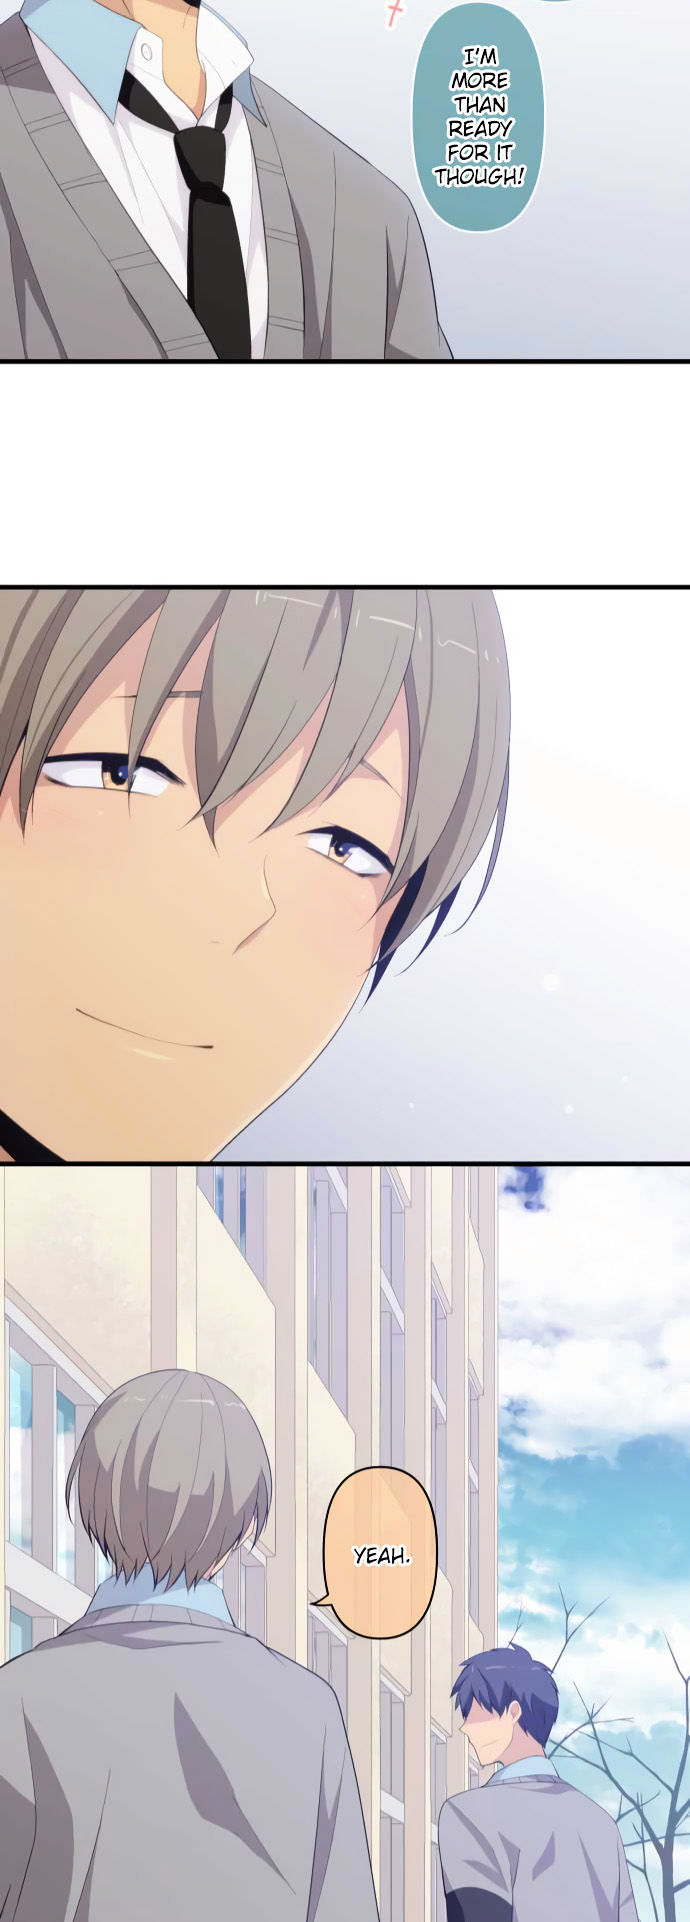 Relife 205 23